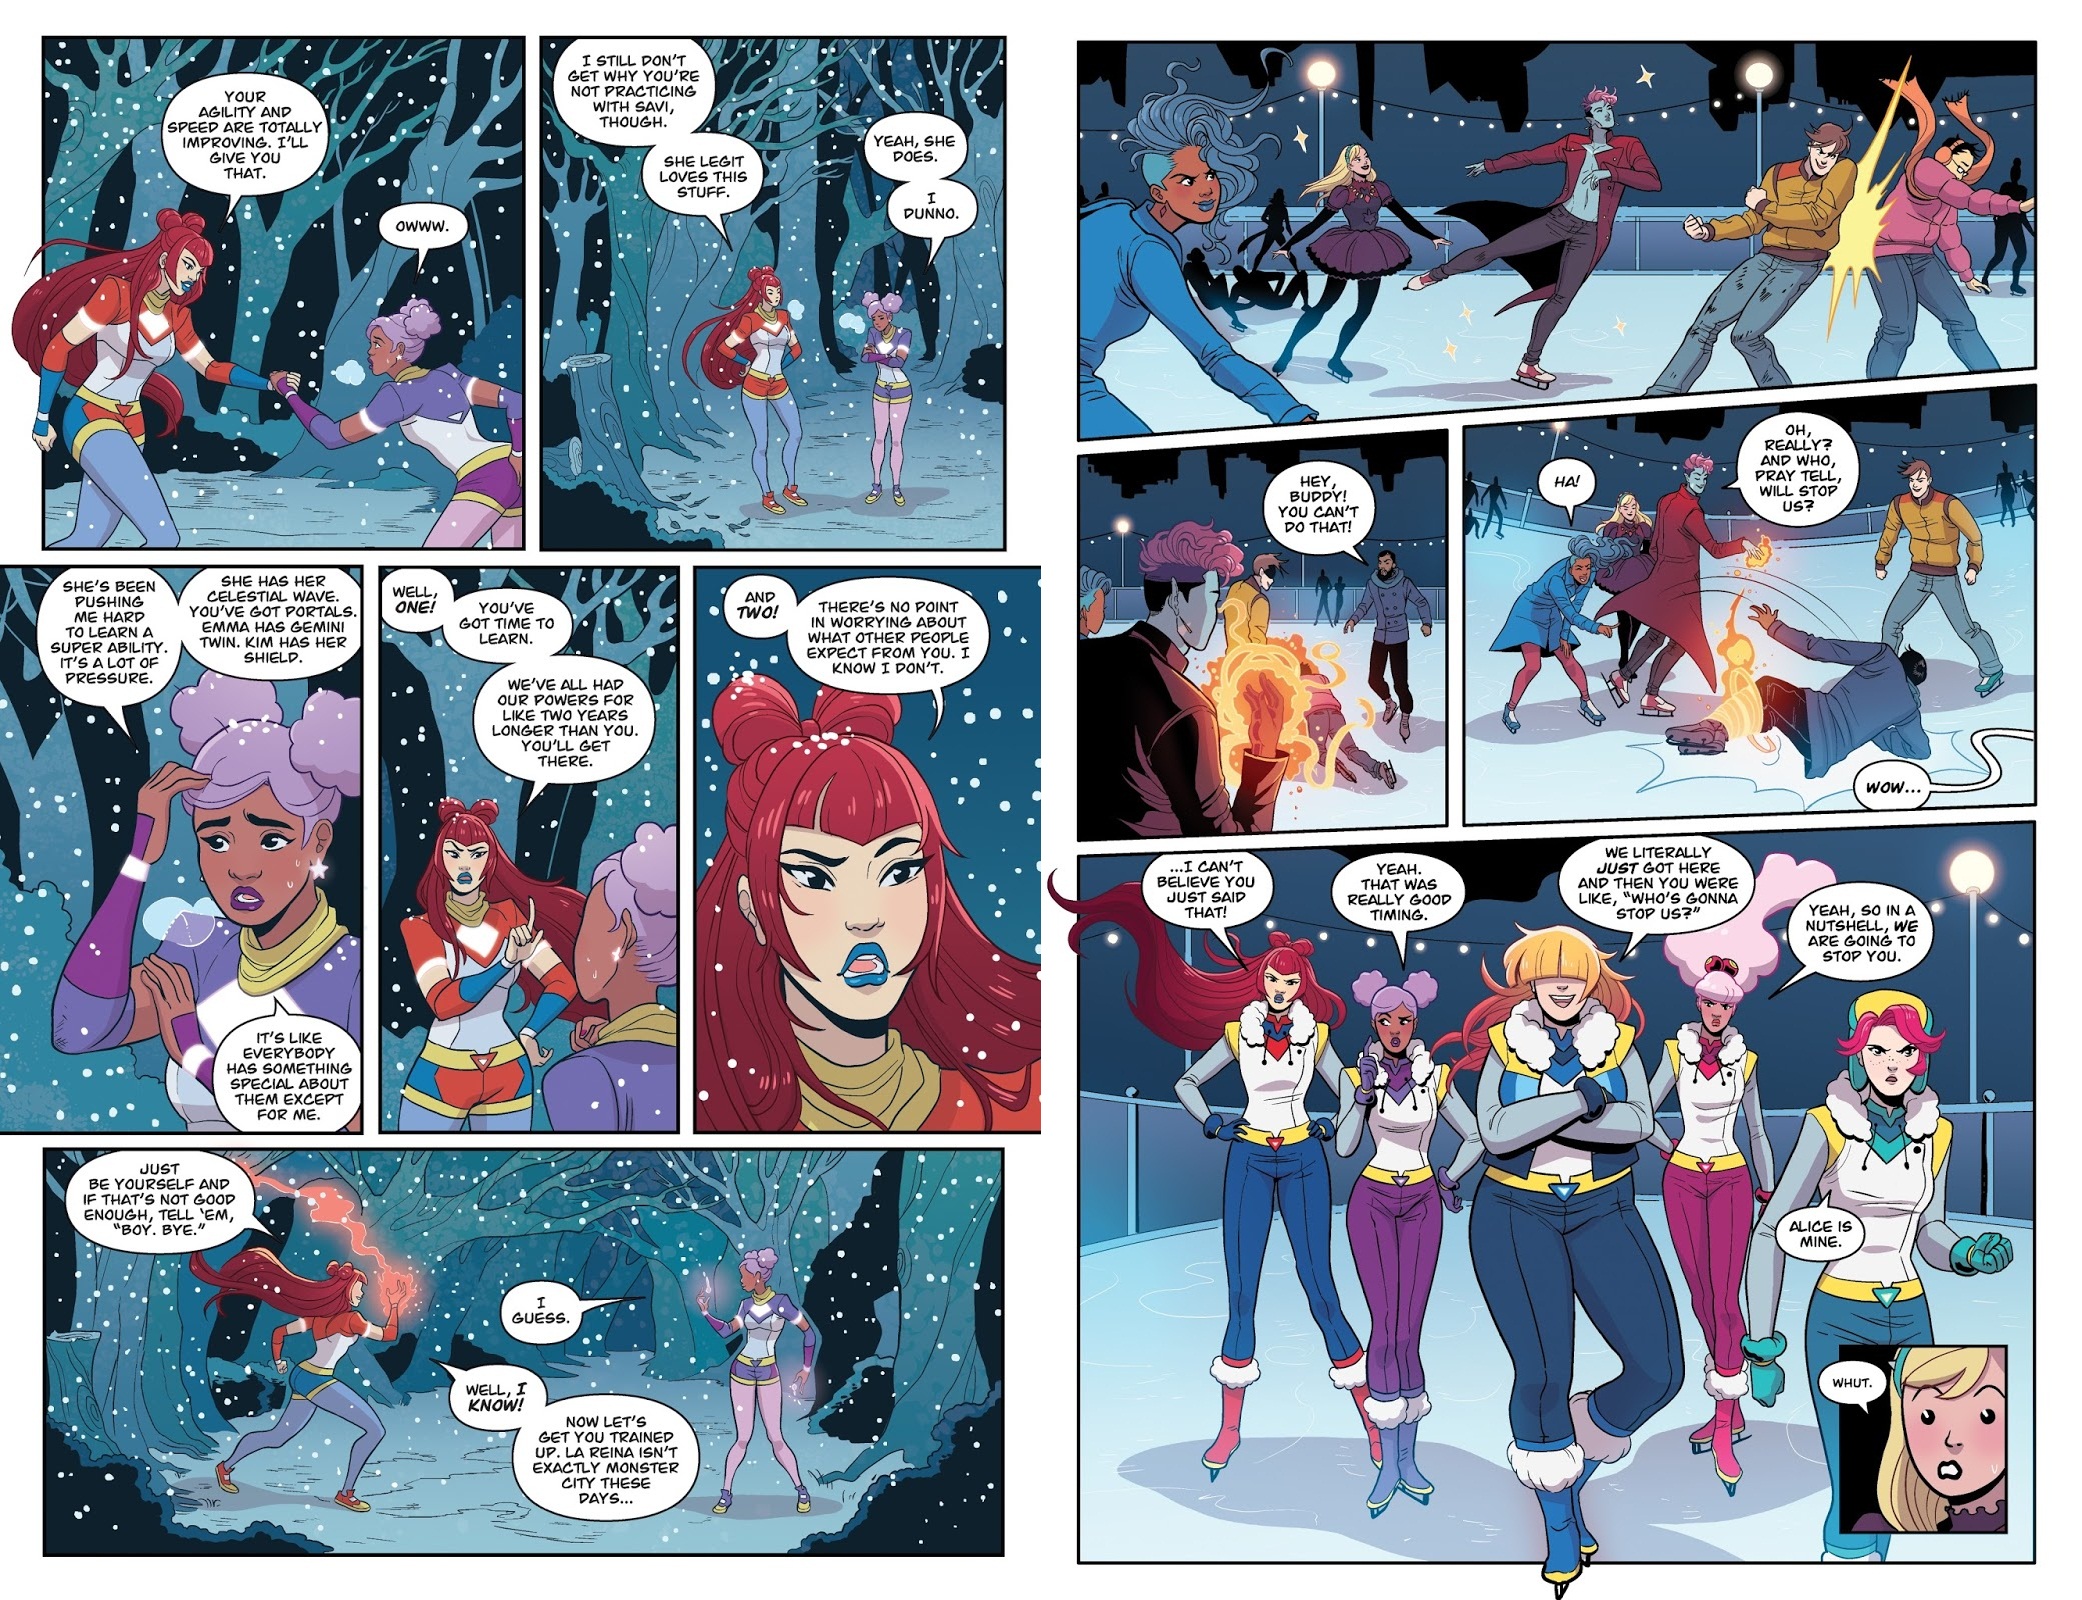 Zodiac Starforce Cries of the Fire Prince review